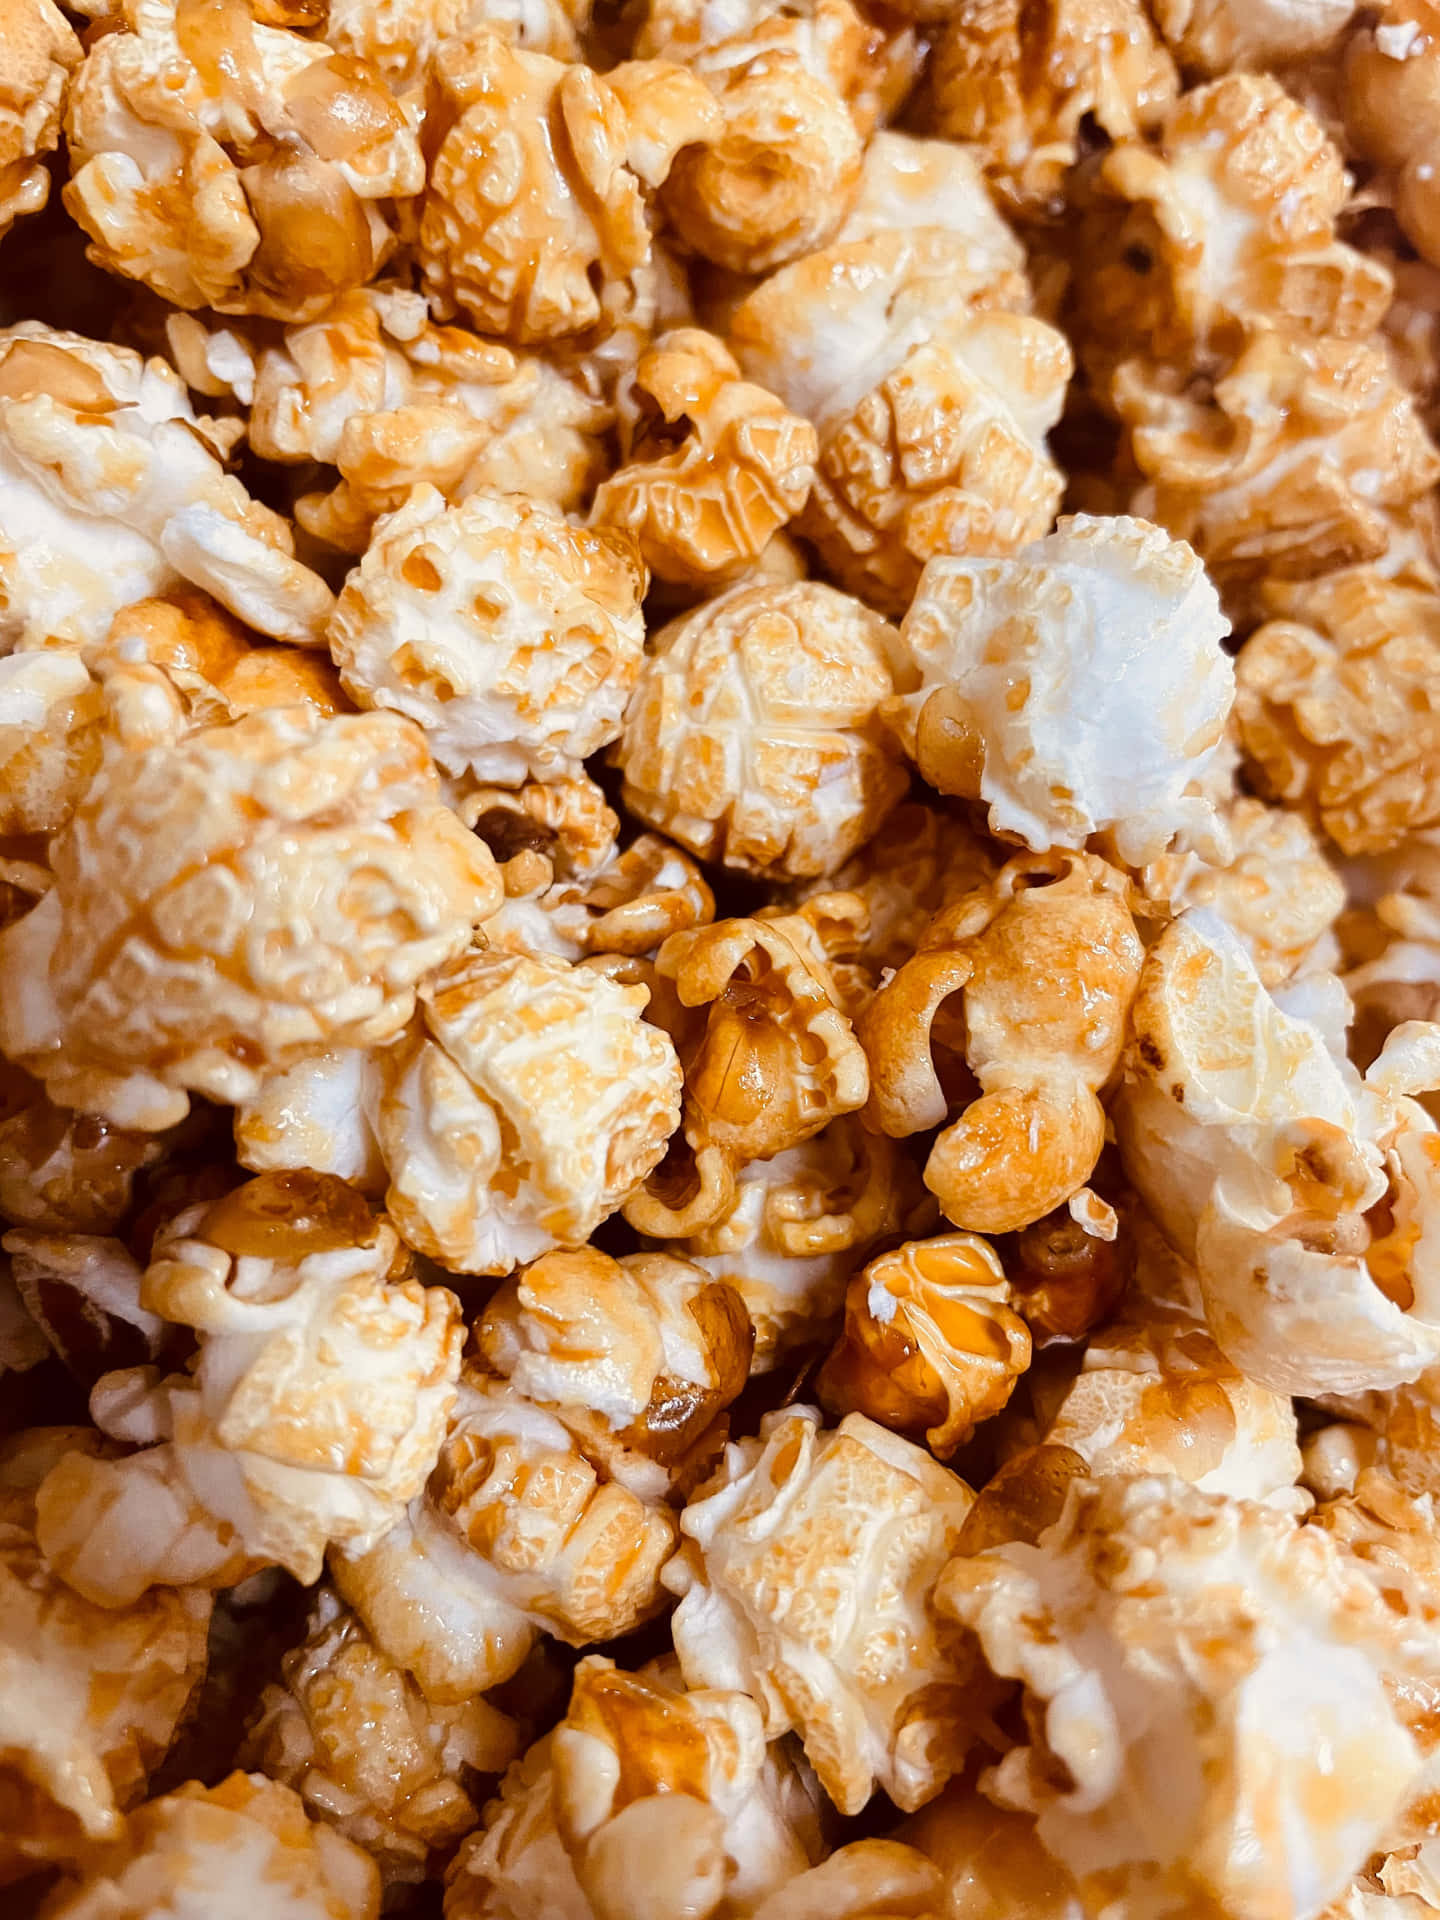 A Bowl Of Popcorn With Caramel